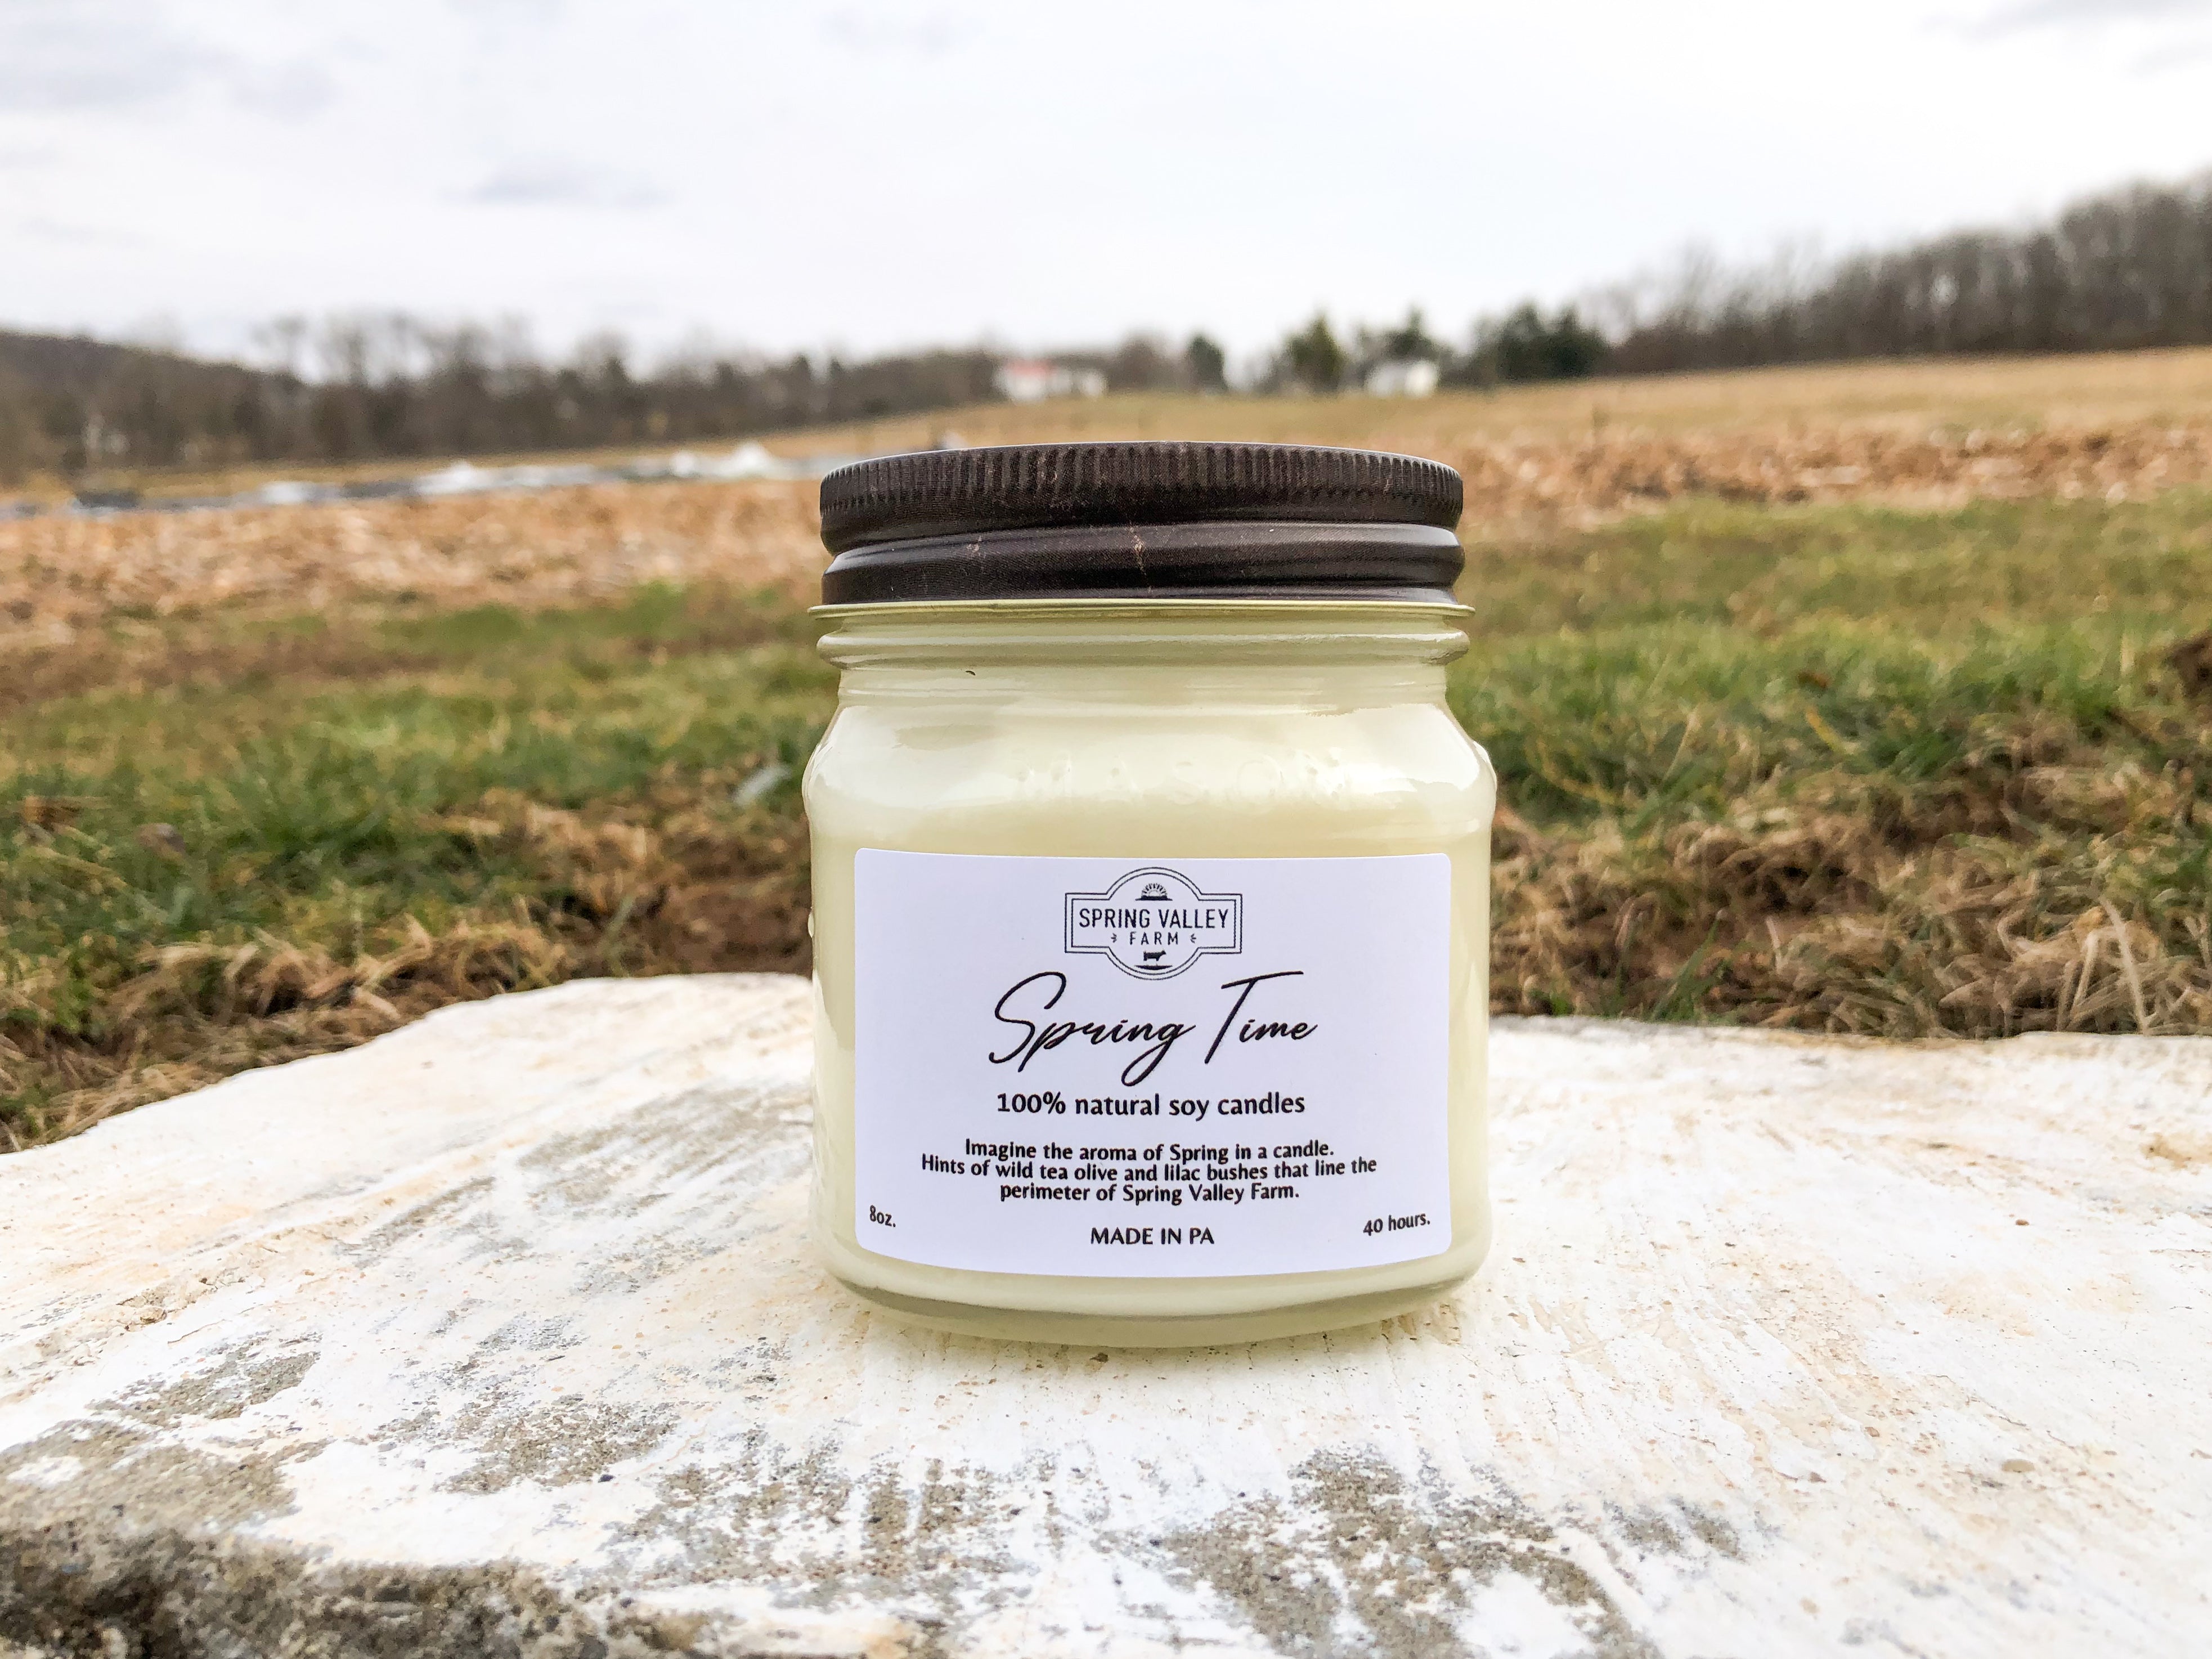 Special Edition - "Spring Time" Candle